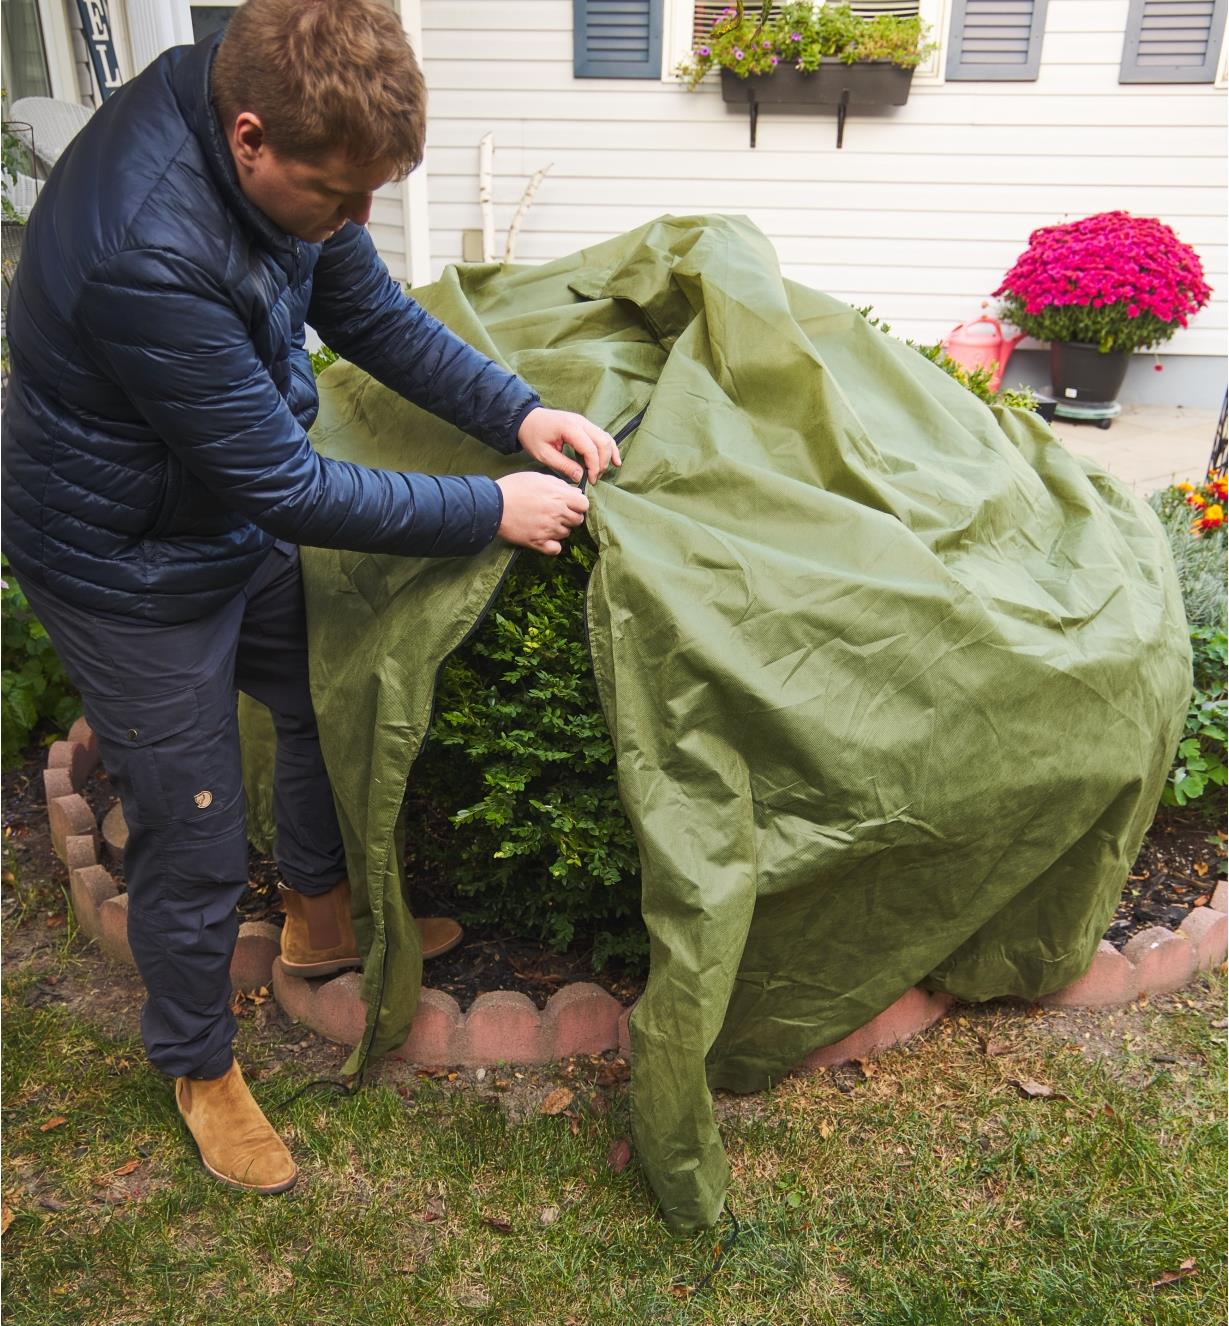 The Shrub & Potted Plant Protector being zipped over a shrub in a garden